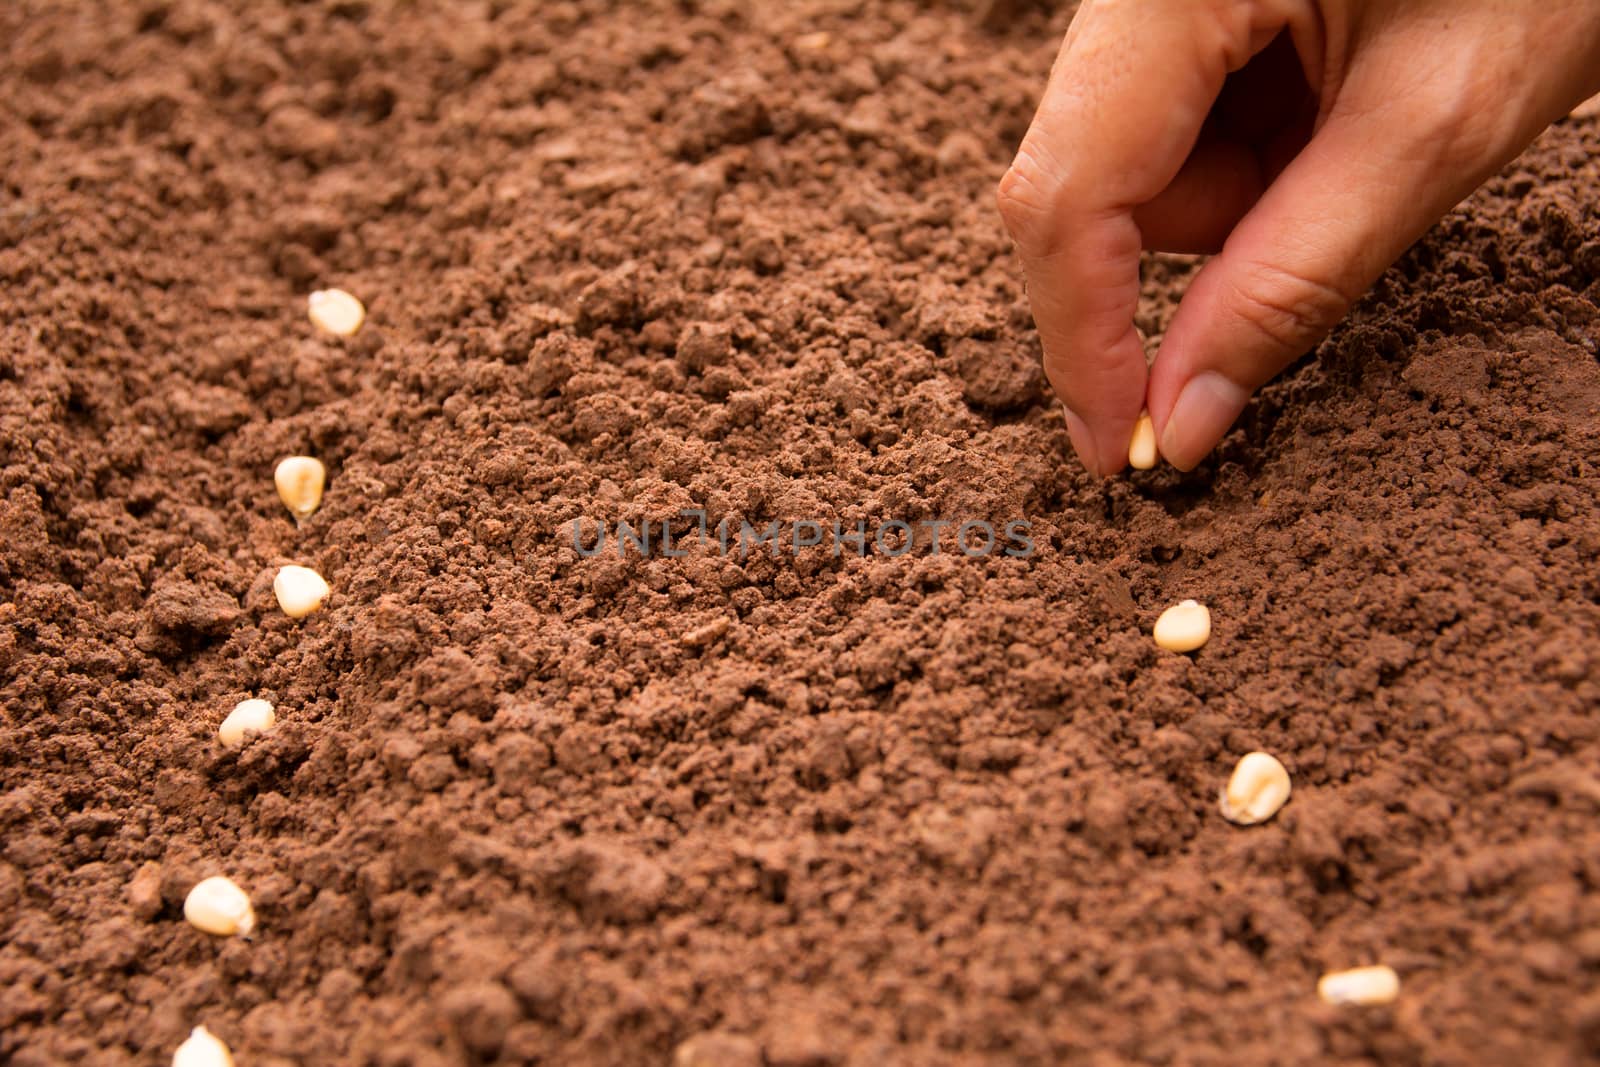 Seedling concept by human hand, Human seeding corn seed in soil.